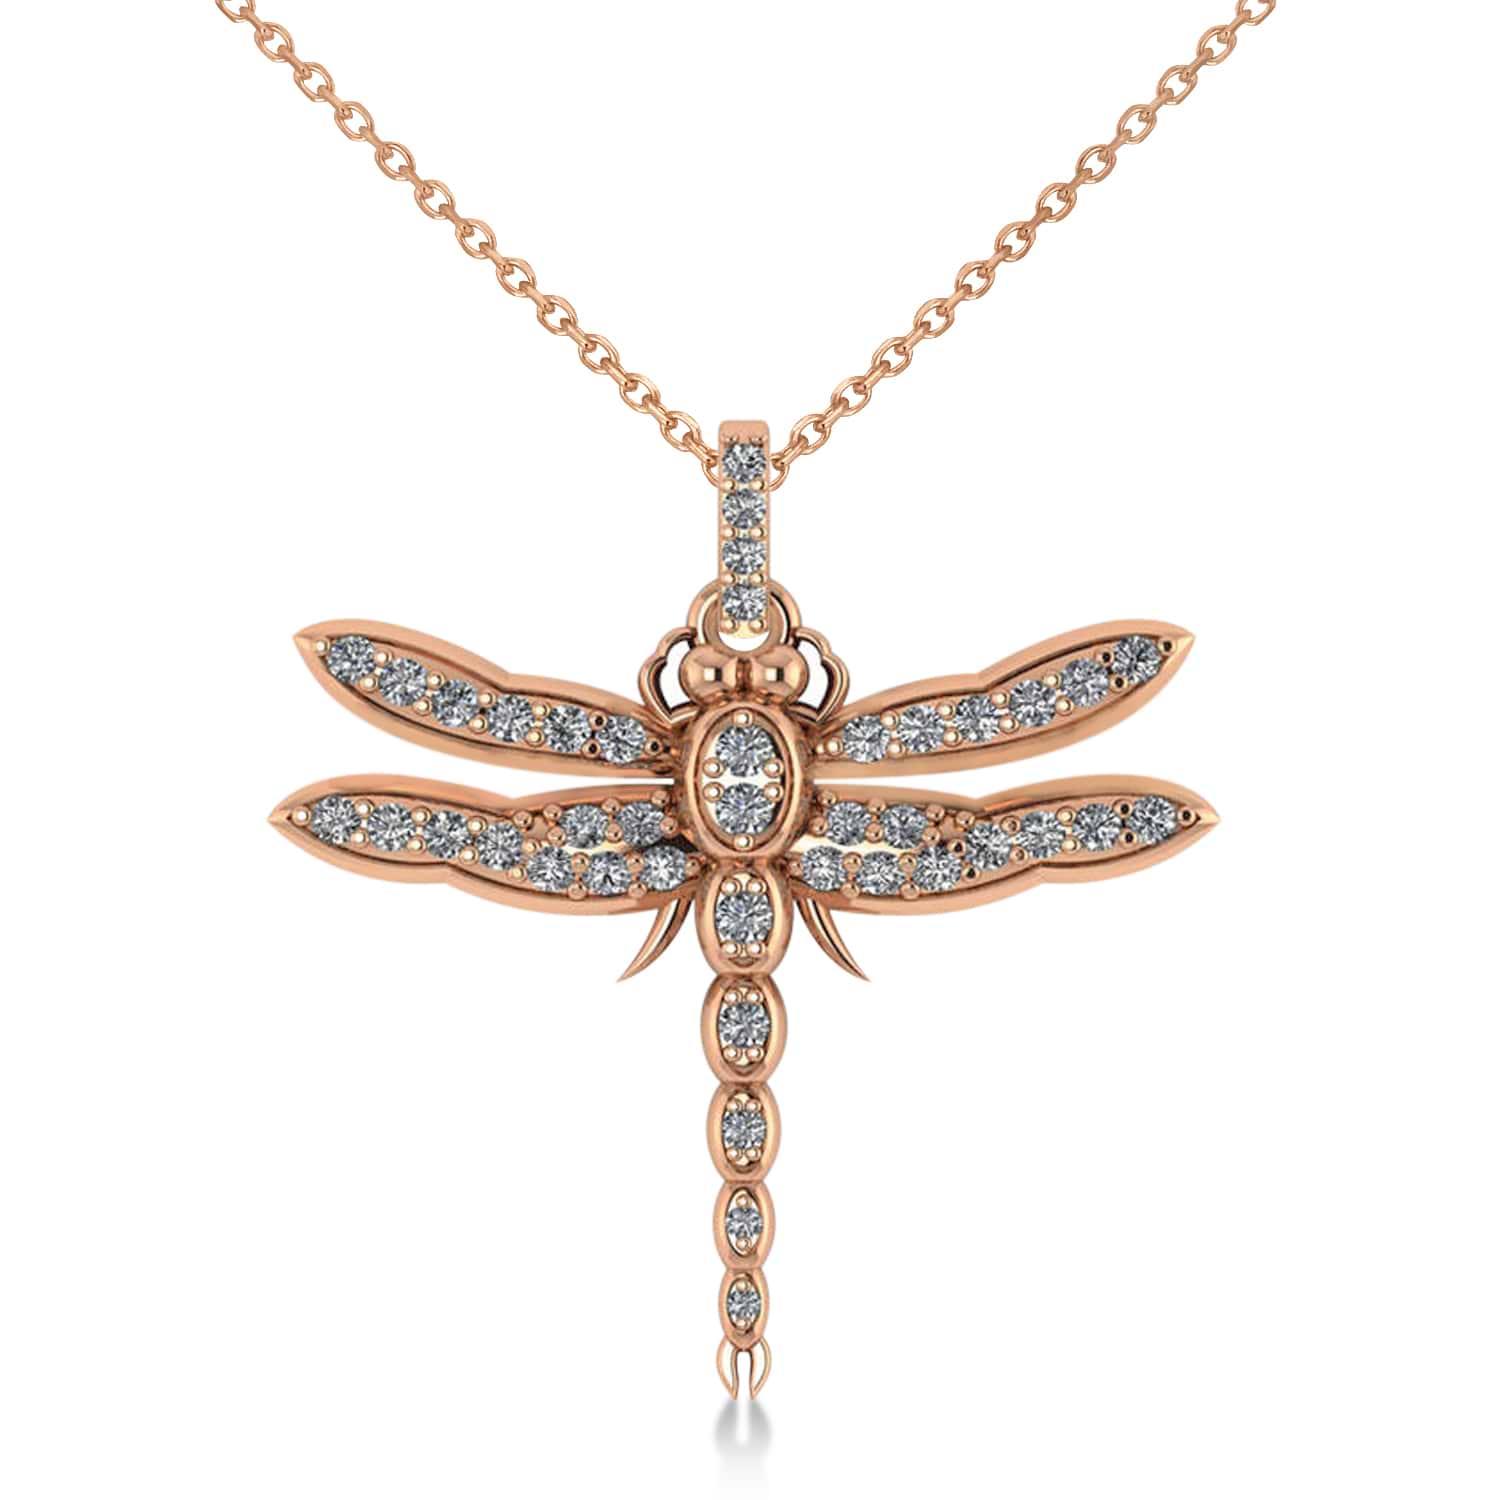 Dragonfly Insect Diamond Pendant Necklace 14k Rose Gold (0.59ct)